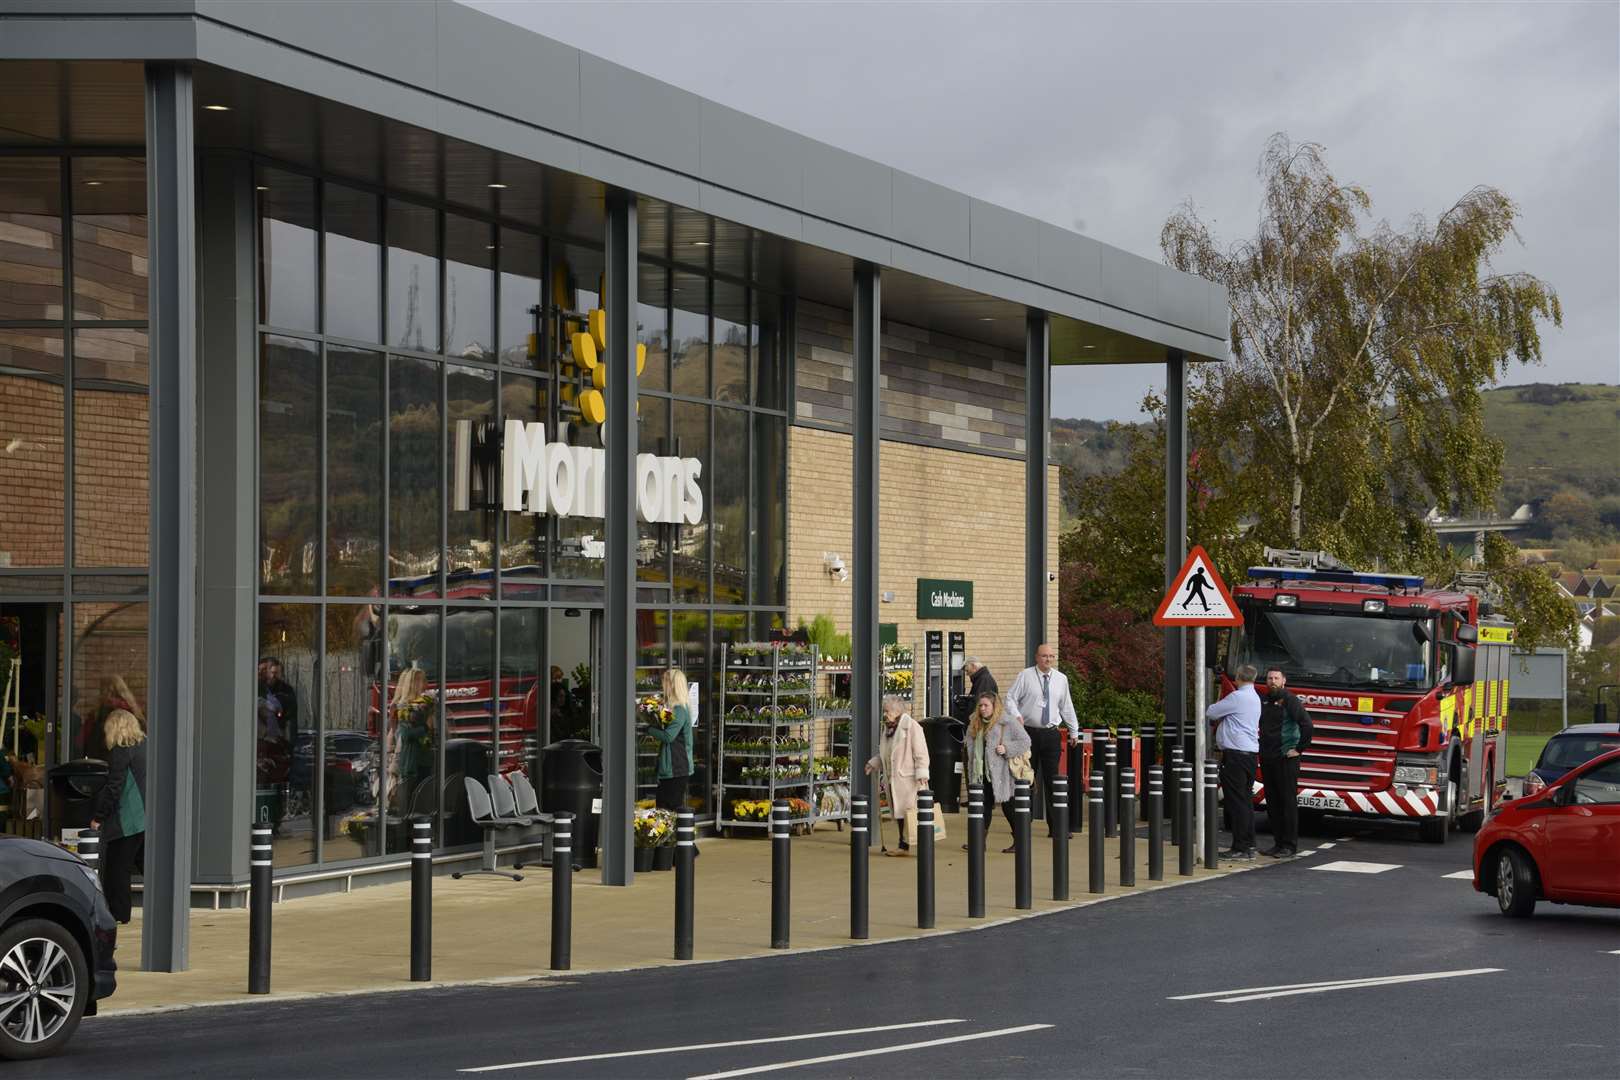 Folkestone's Morrisons is now open and fire crews were invited to attend the official launch. Picture: Paul Amos